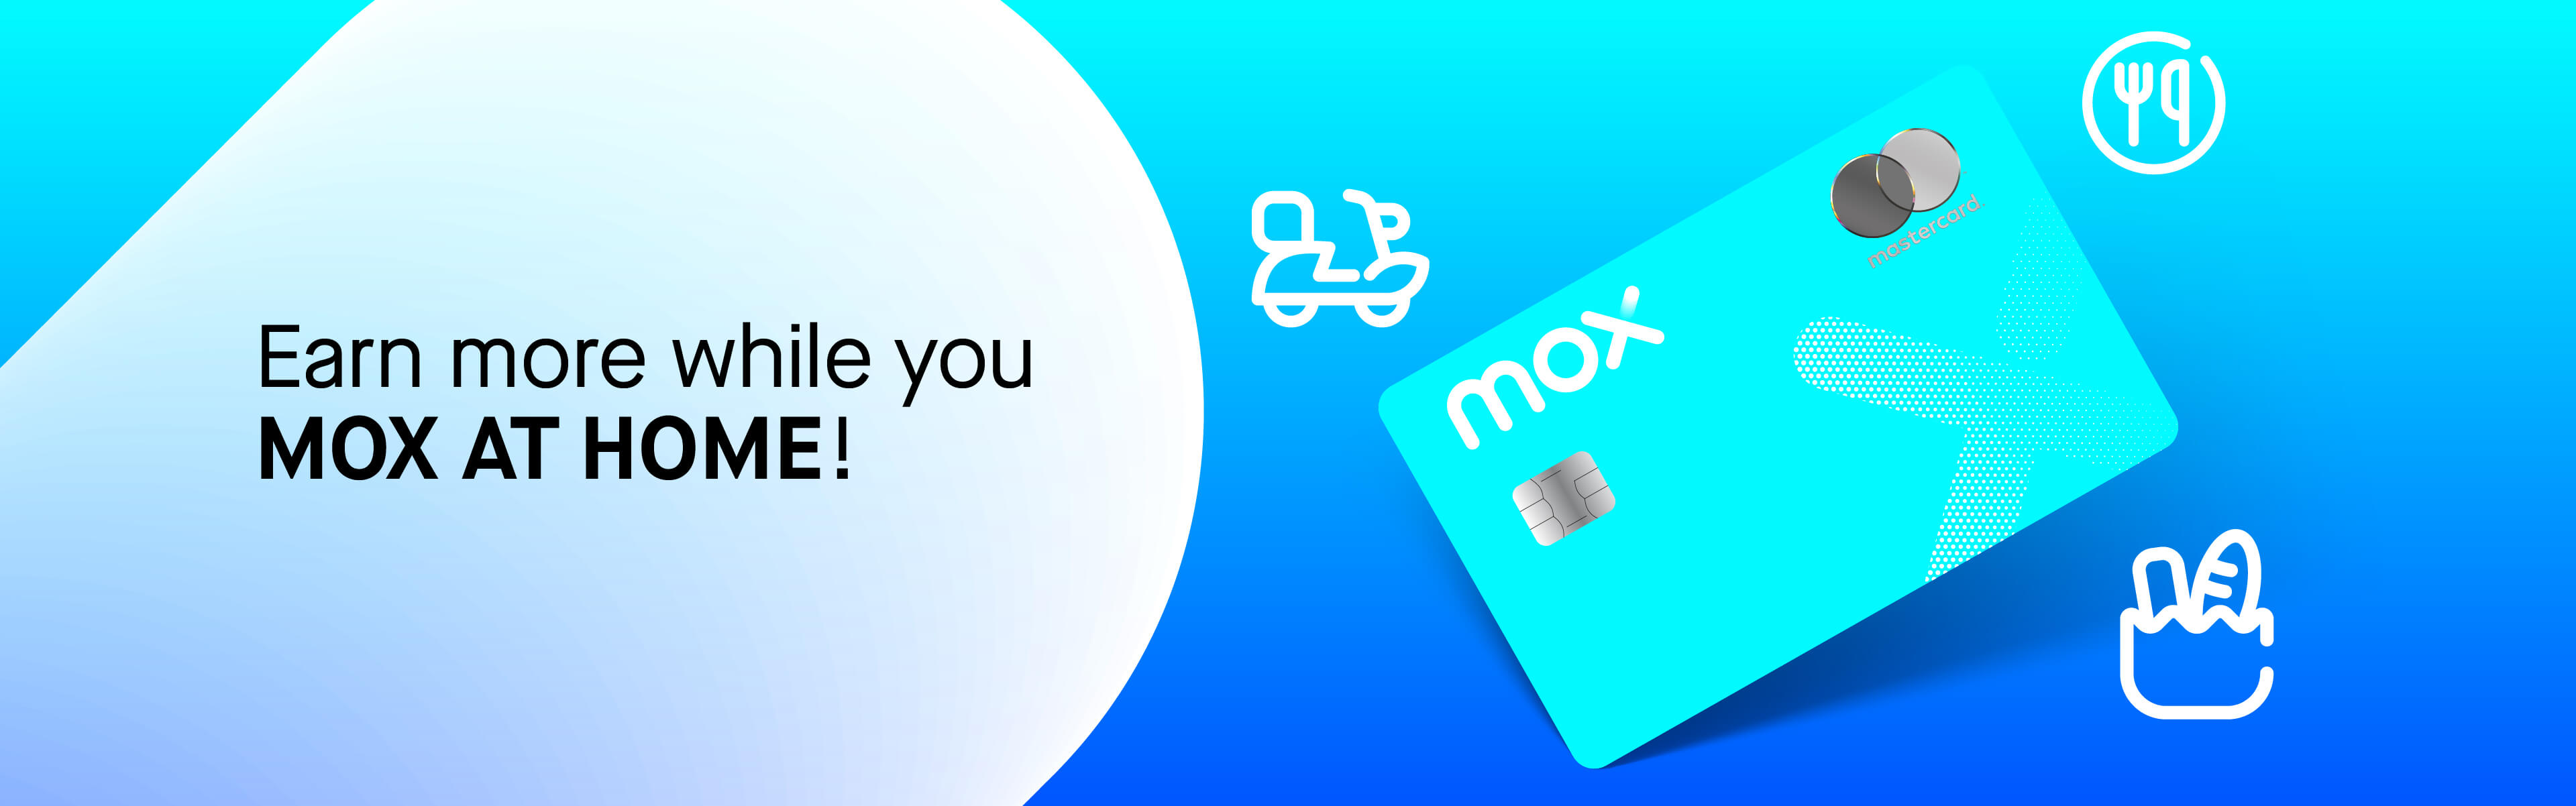 New Mox deals to make life easier under new social distancing rules 